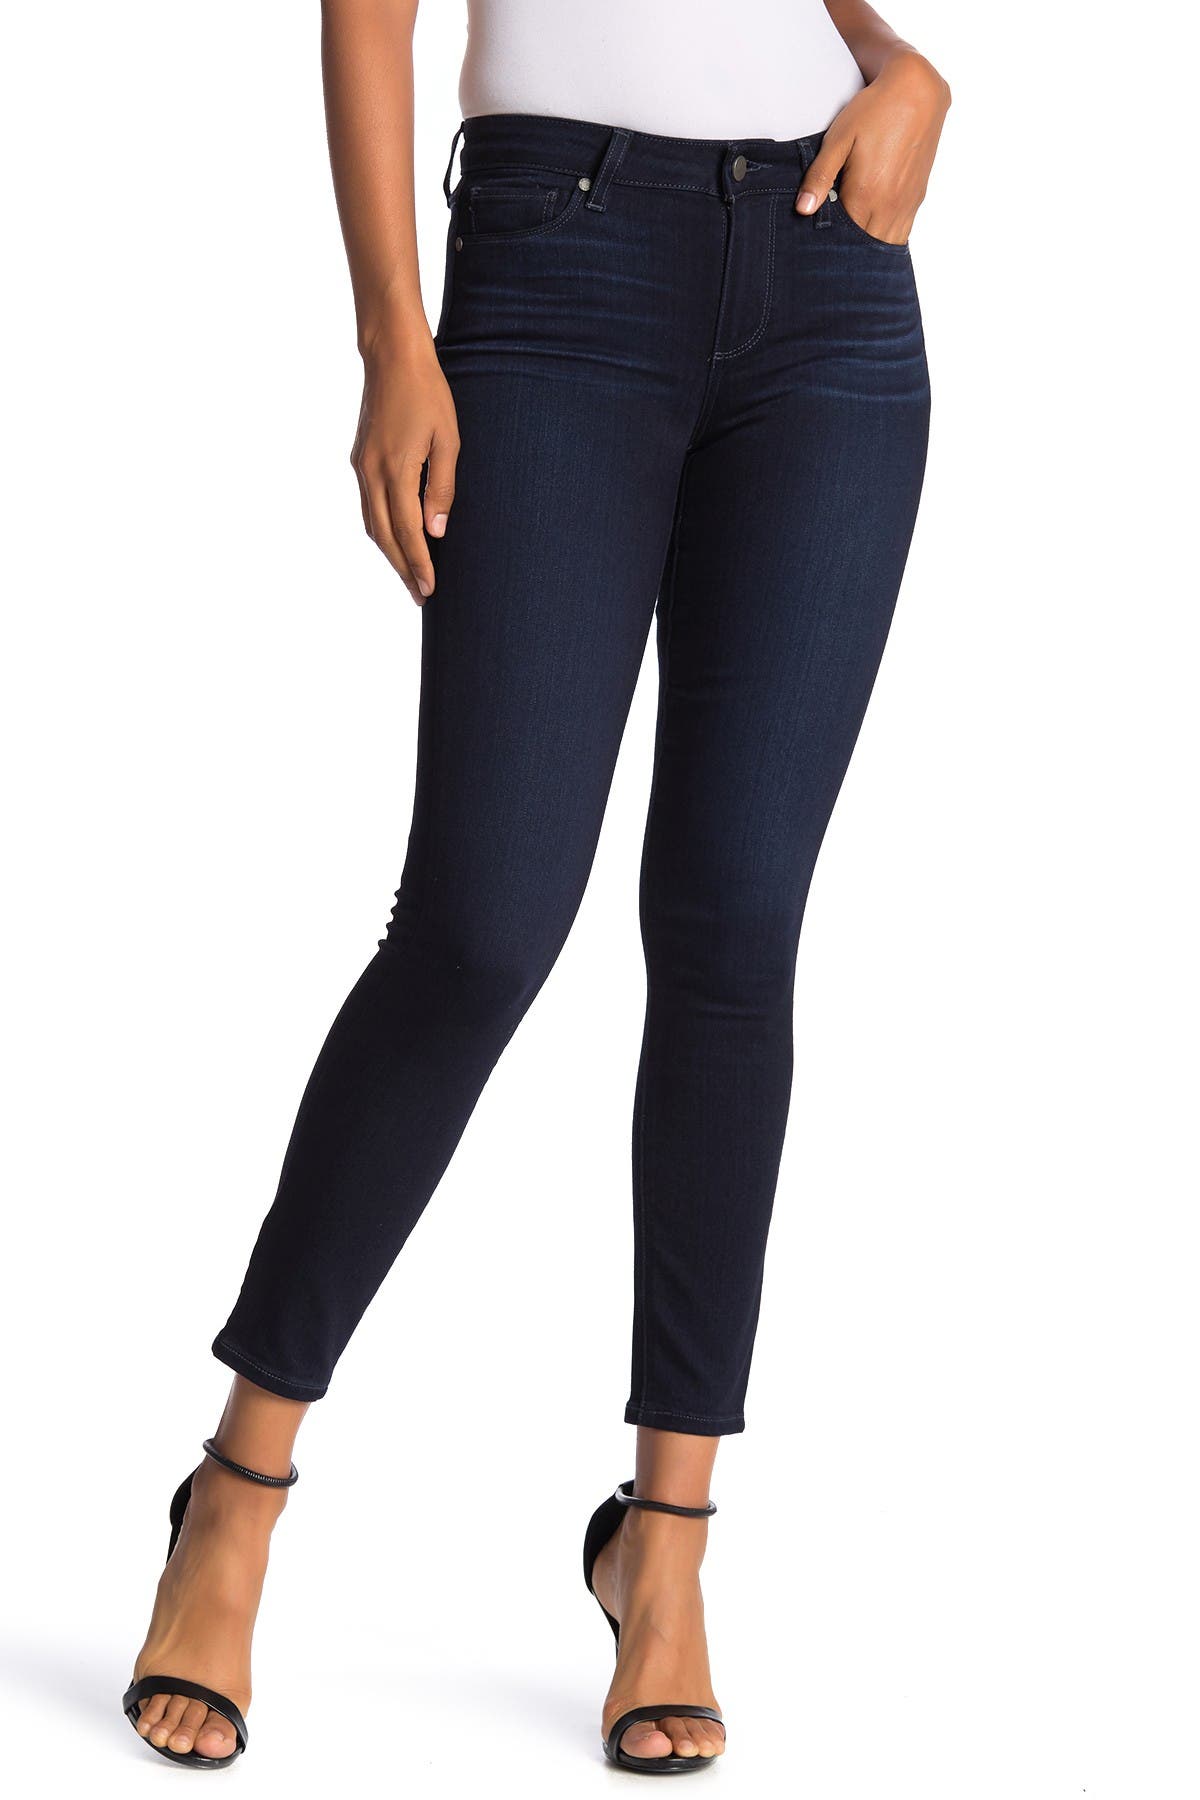 paige jeans canada